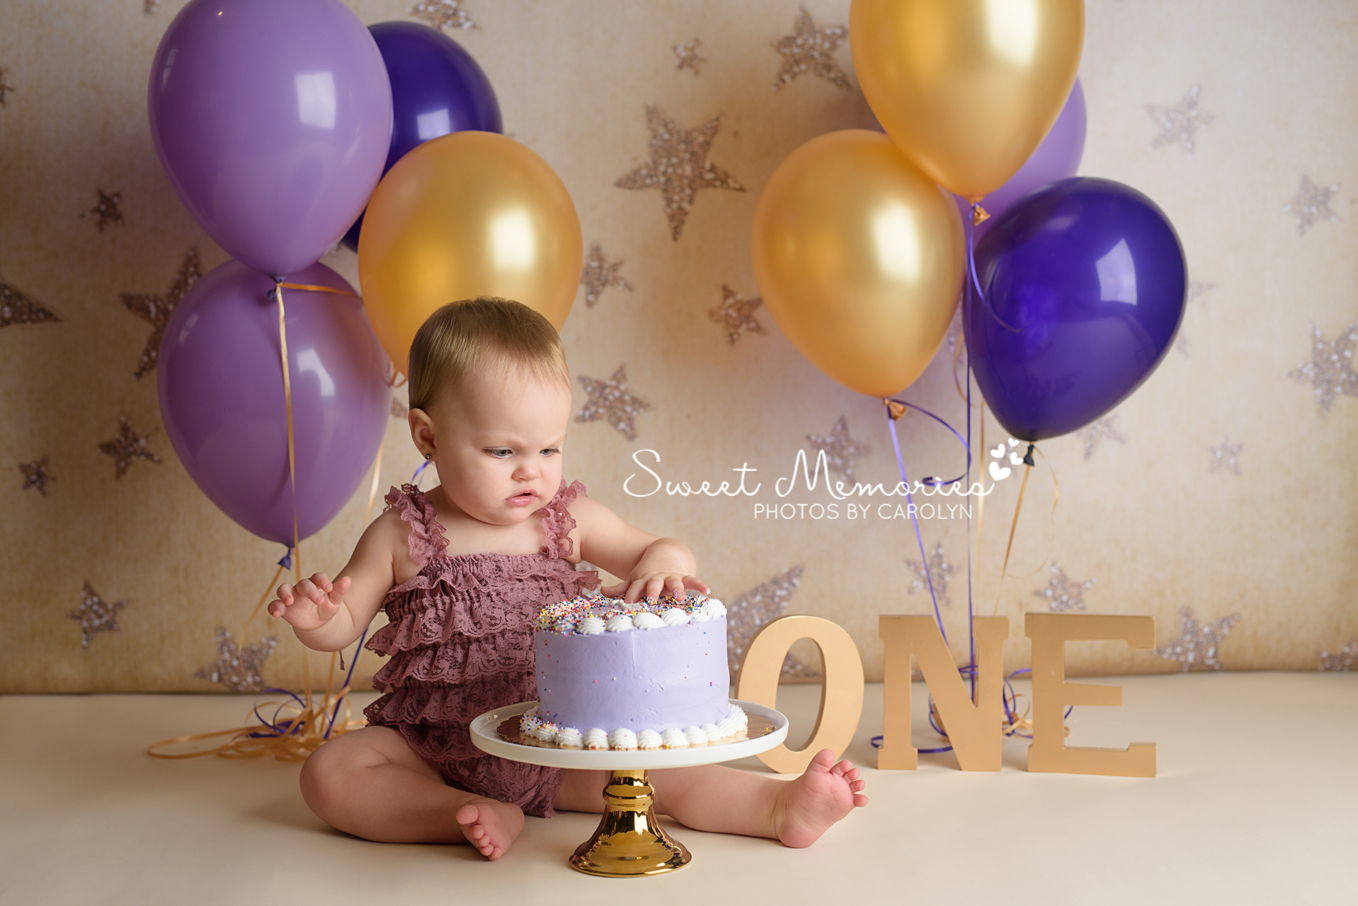 One year old girl in lace romper with purple cake on gold star background with gold and purple balloons | Sweet Memories Photos by Carolyn